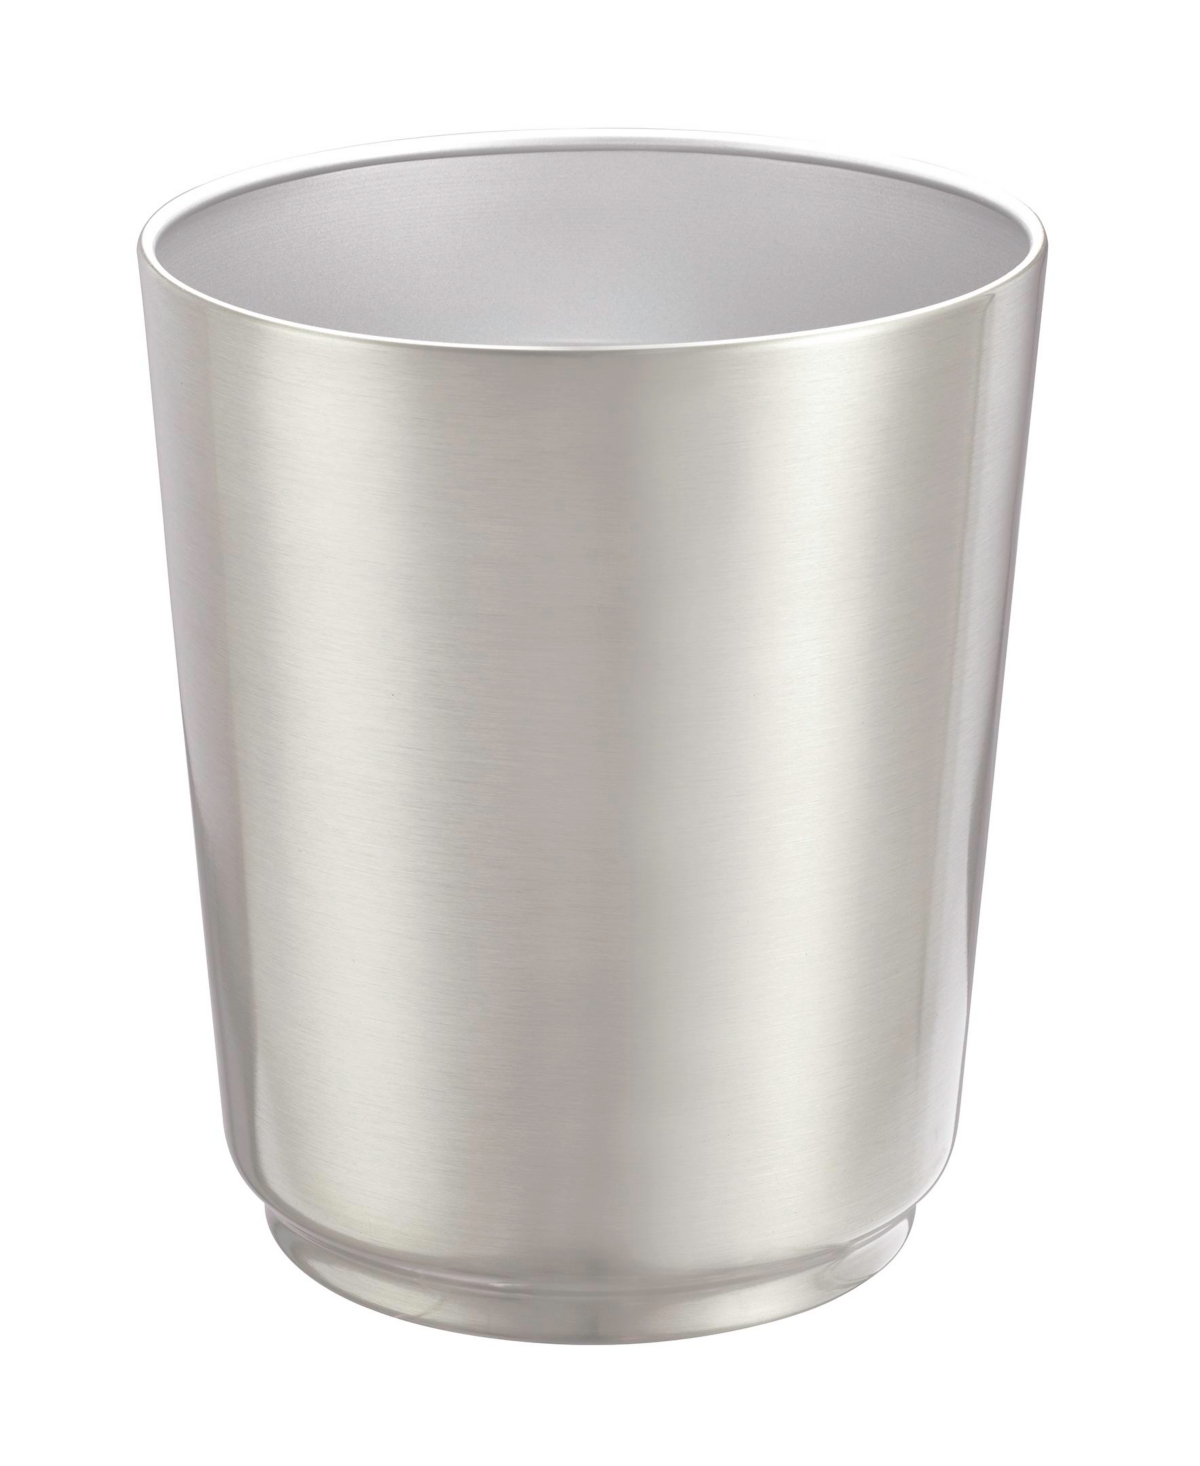 Idesign Austin Small Brushed Stainless Steel Waste Basket